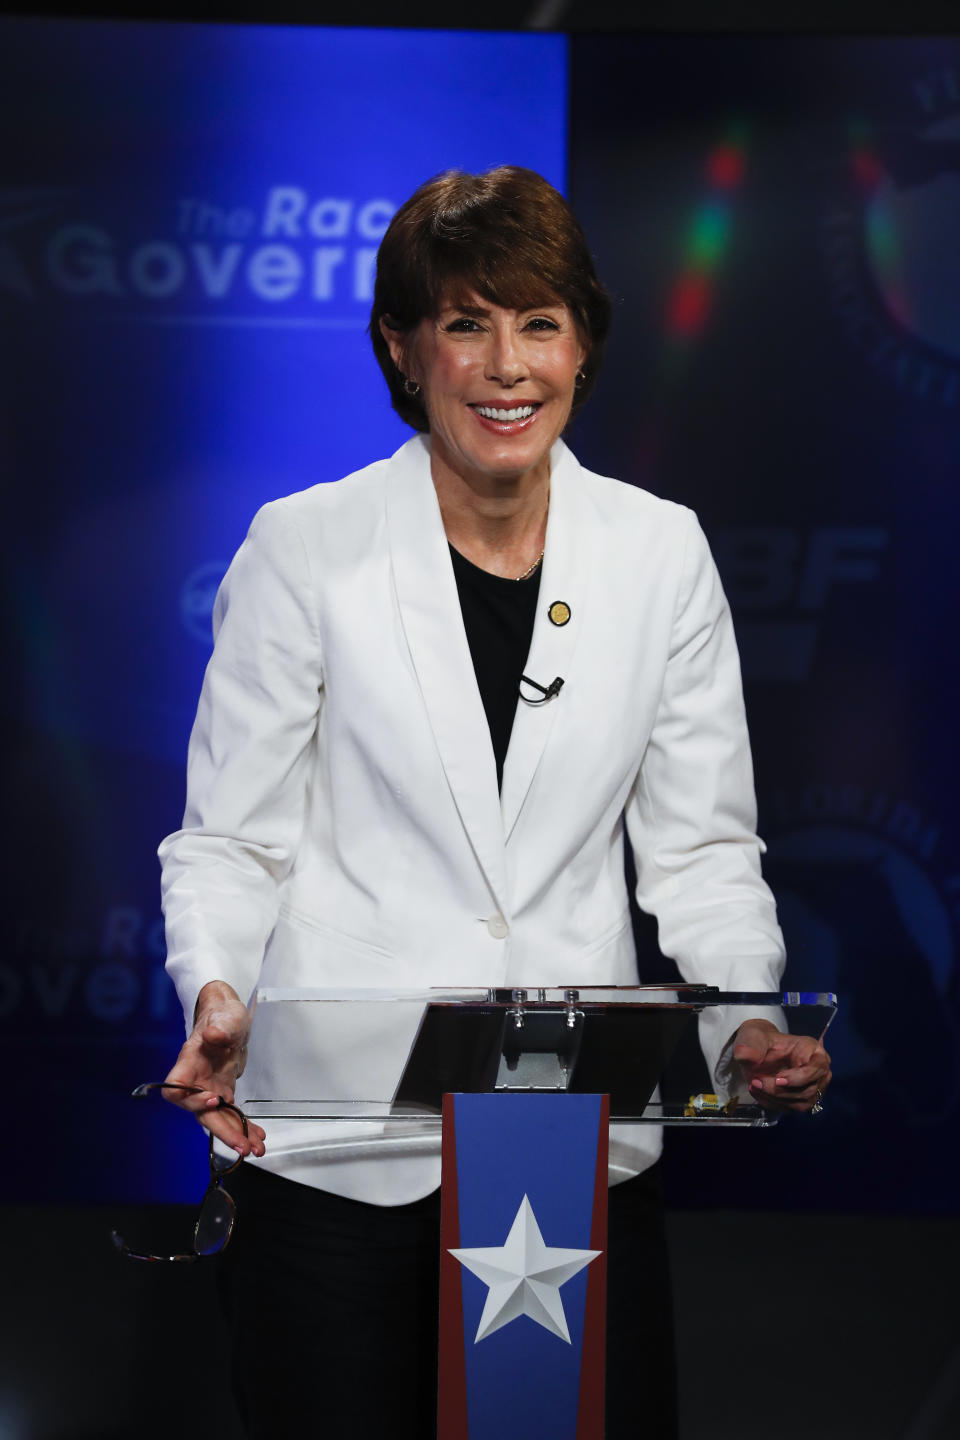 Democratic gubernatorial candidate Gwen Graham awaits the start of a debate ahead of the Democratic primary for governor, Thursday, Aug. 2, 2018, in Palm Beach Gardens, Fla. (AP Photo/Brynn Anderson)